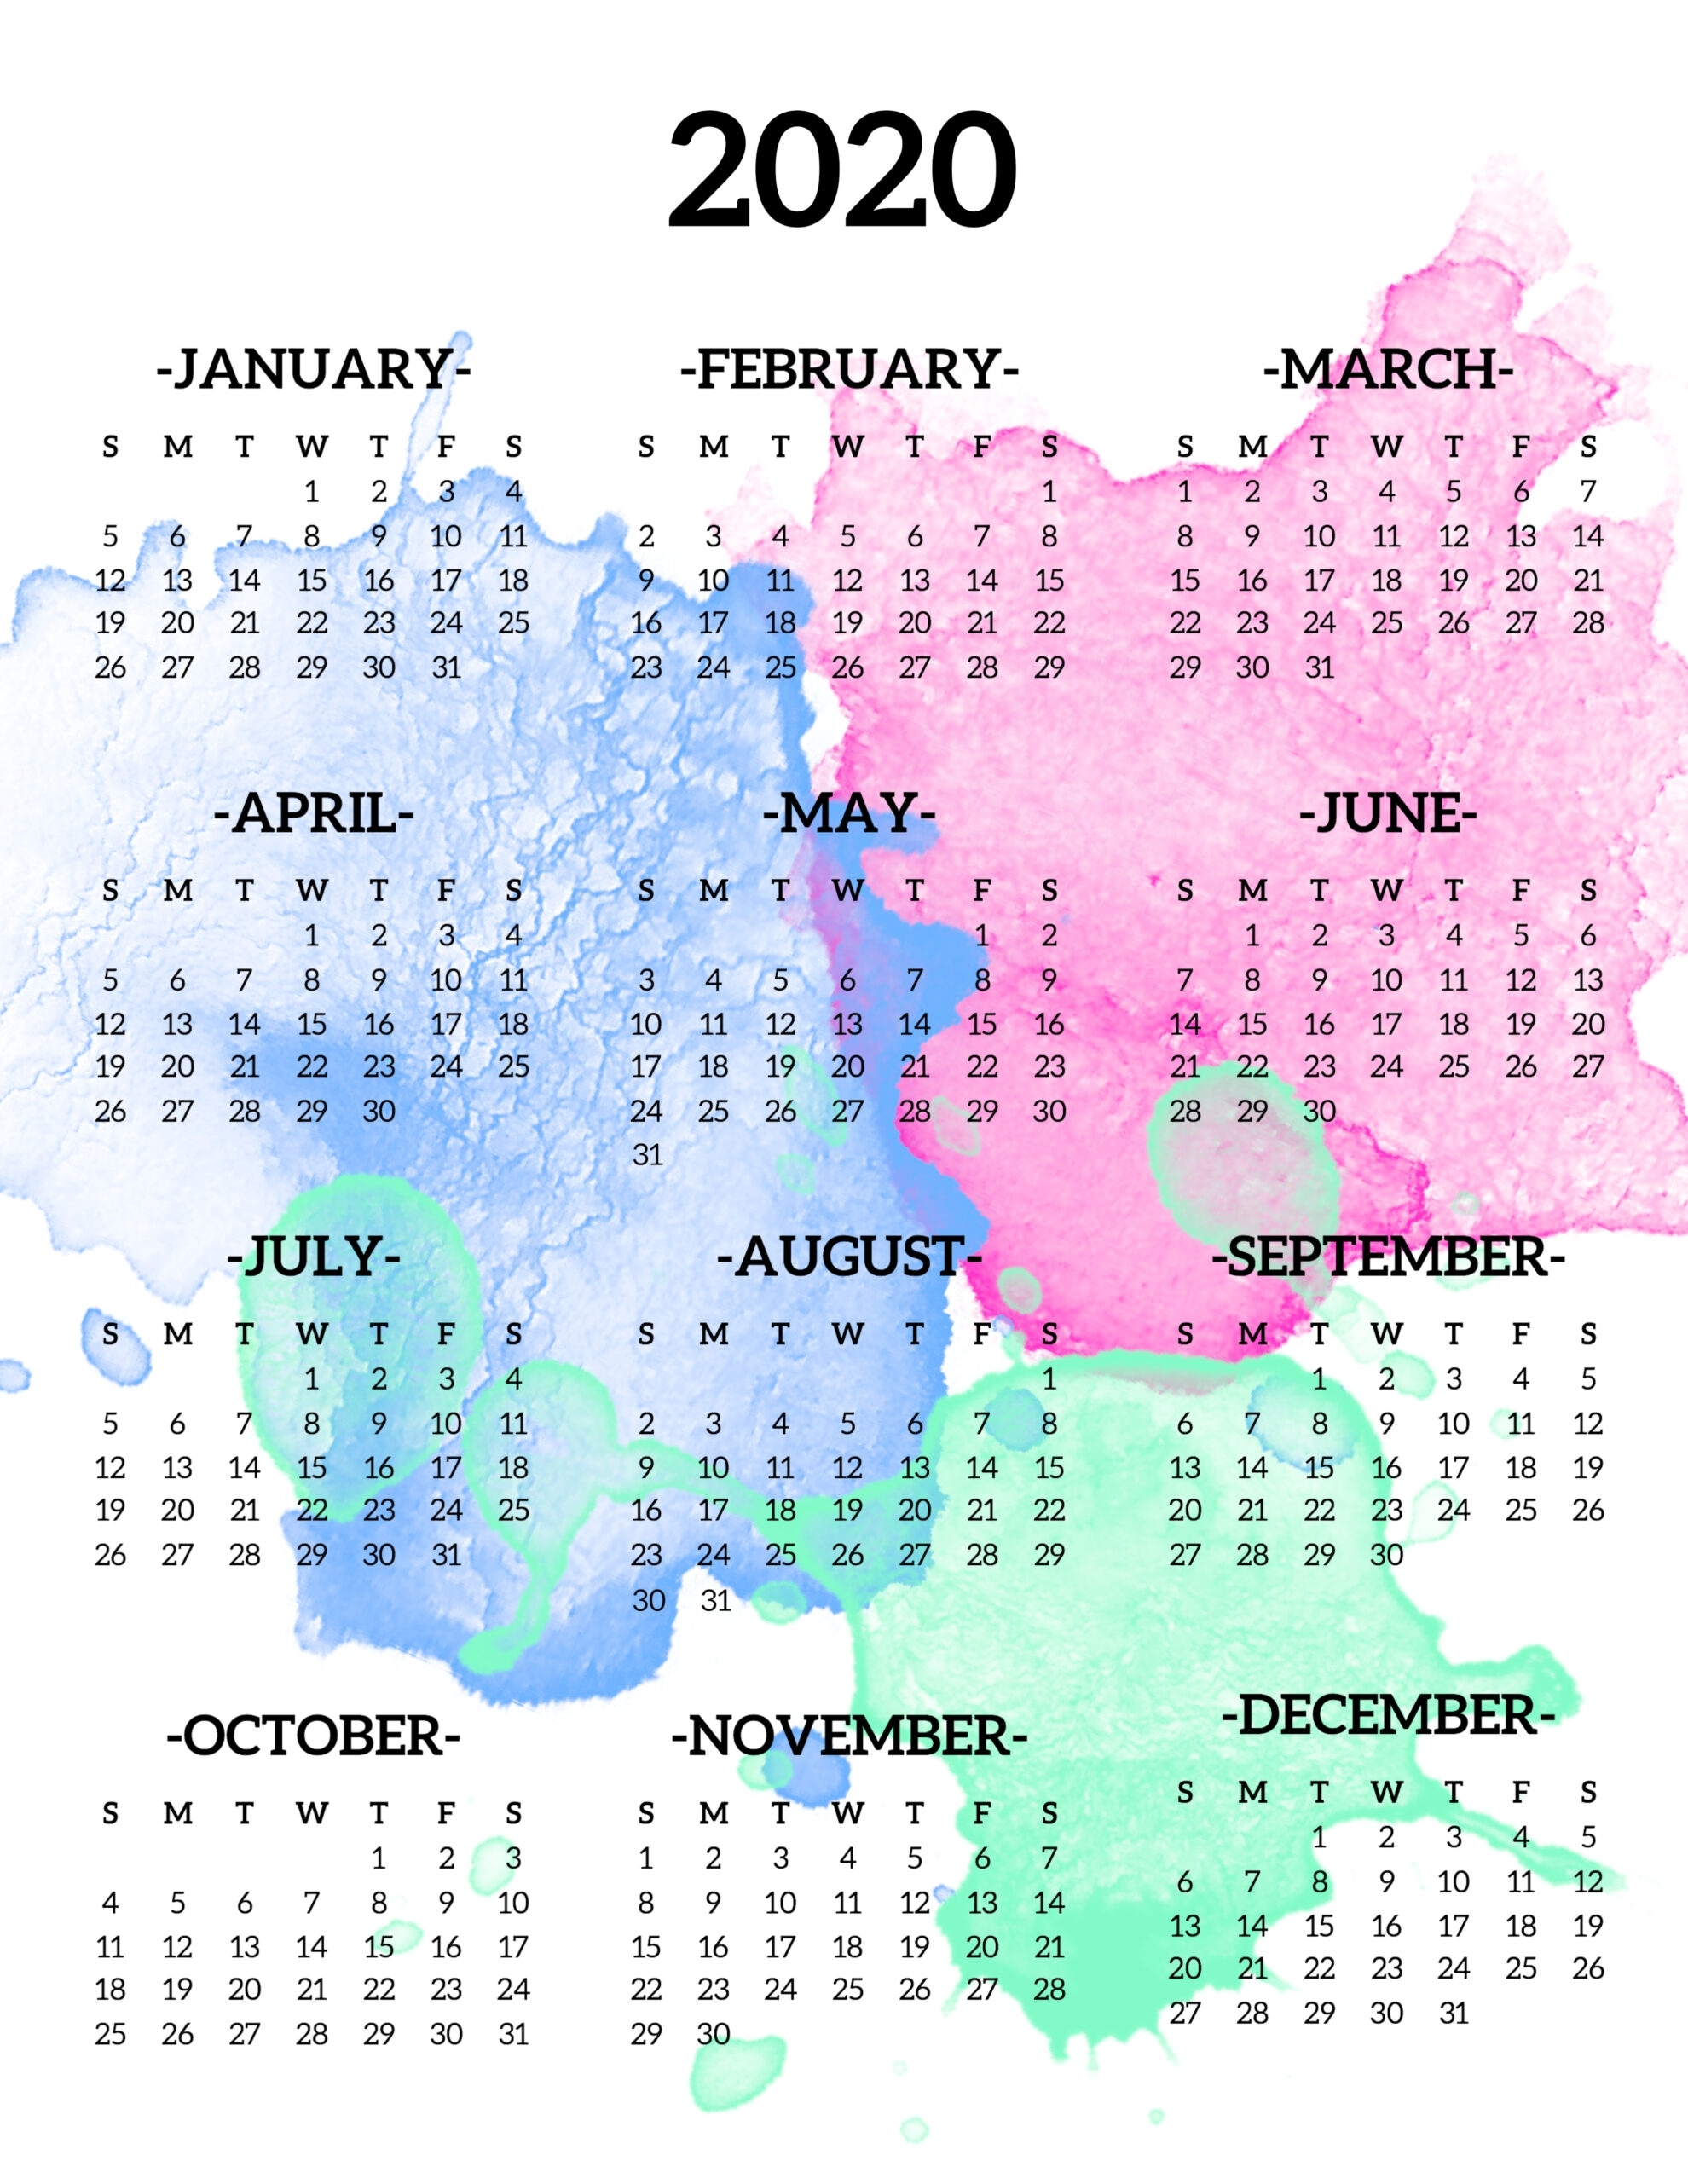 Calendar 2020 Printable One Page - Paper Trail Design with regard to Calendar At A Glance 2020